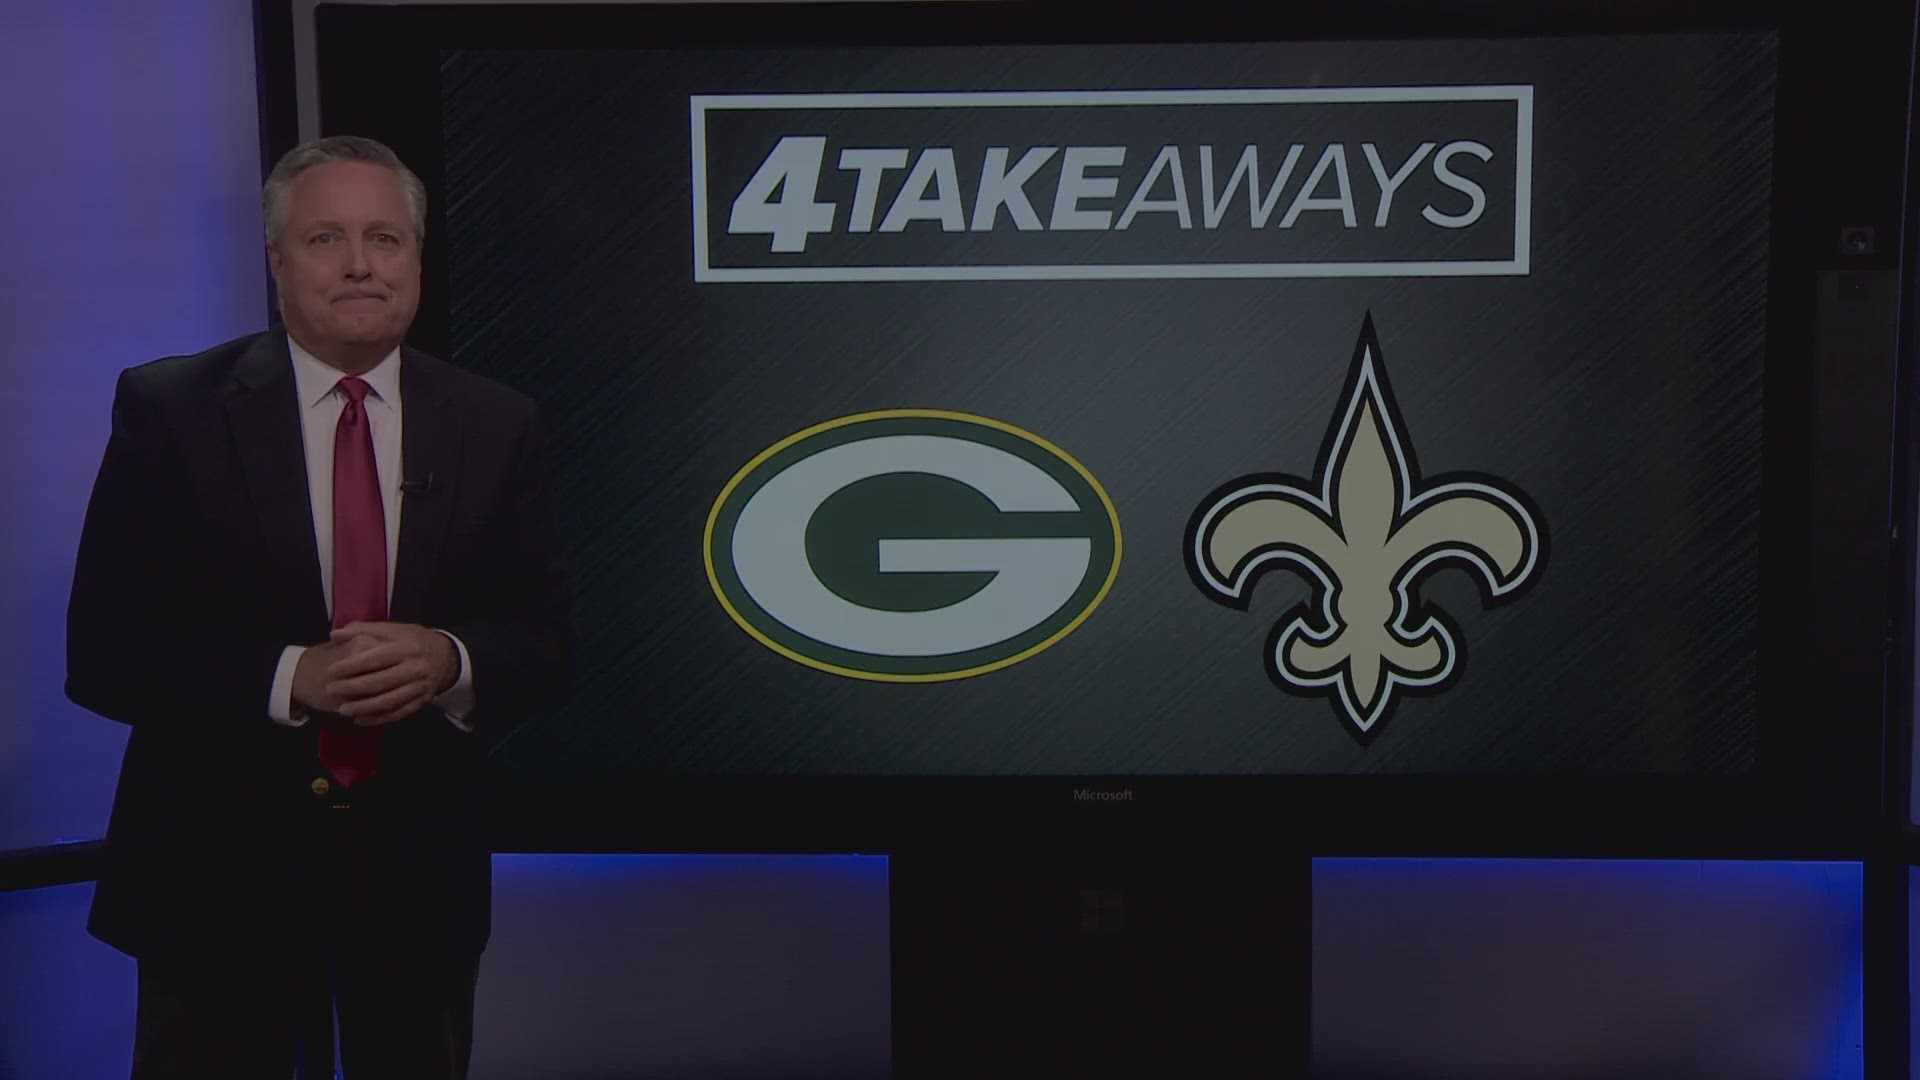 WWL-TV Sports Director Doug Mouton shares his four takeaways from the Saints' loss in Green Bay